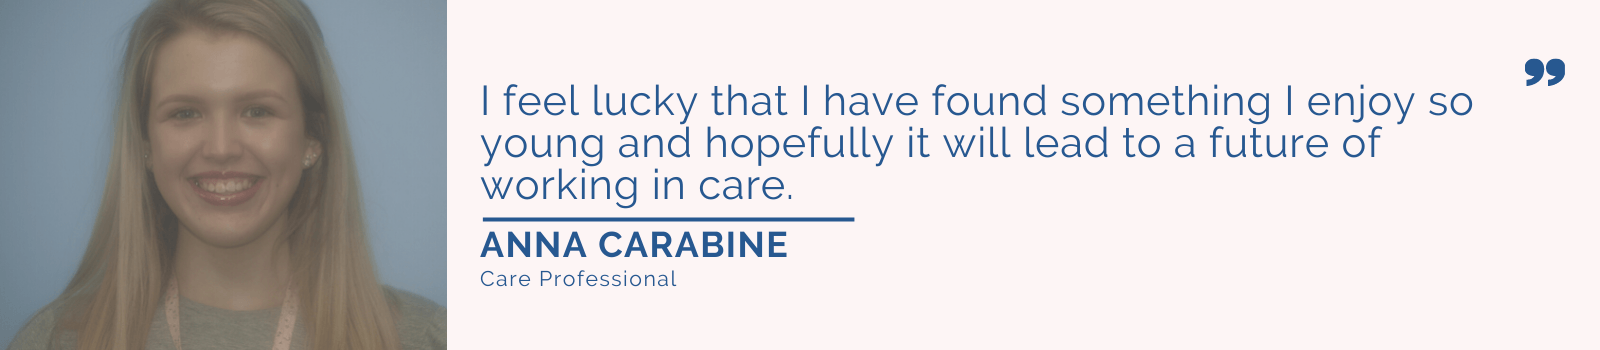 Quote from Anna Carabine.. "I feel lucky that I have found something I enjoy so young and hopefully it will lead to a future of working in care".